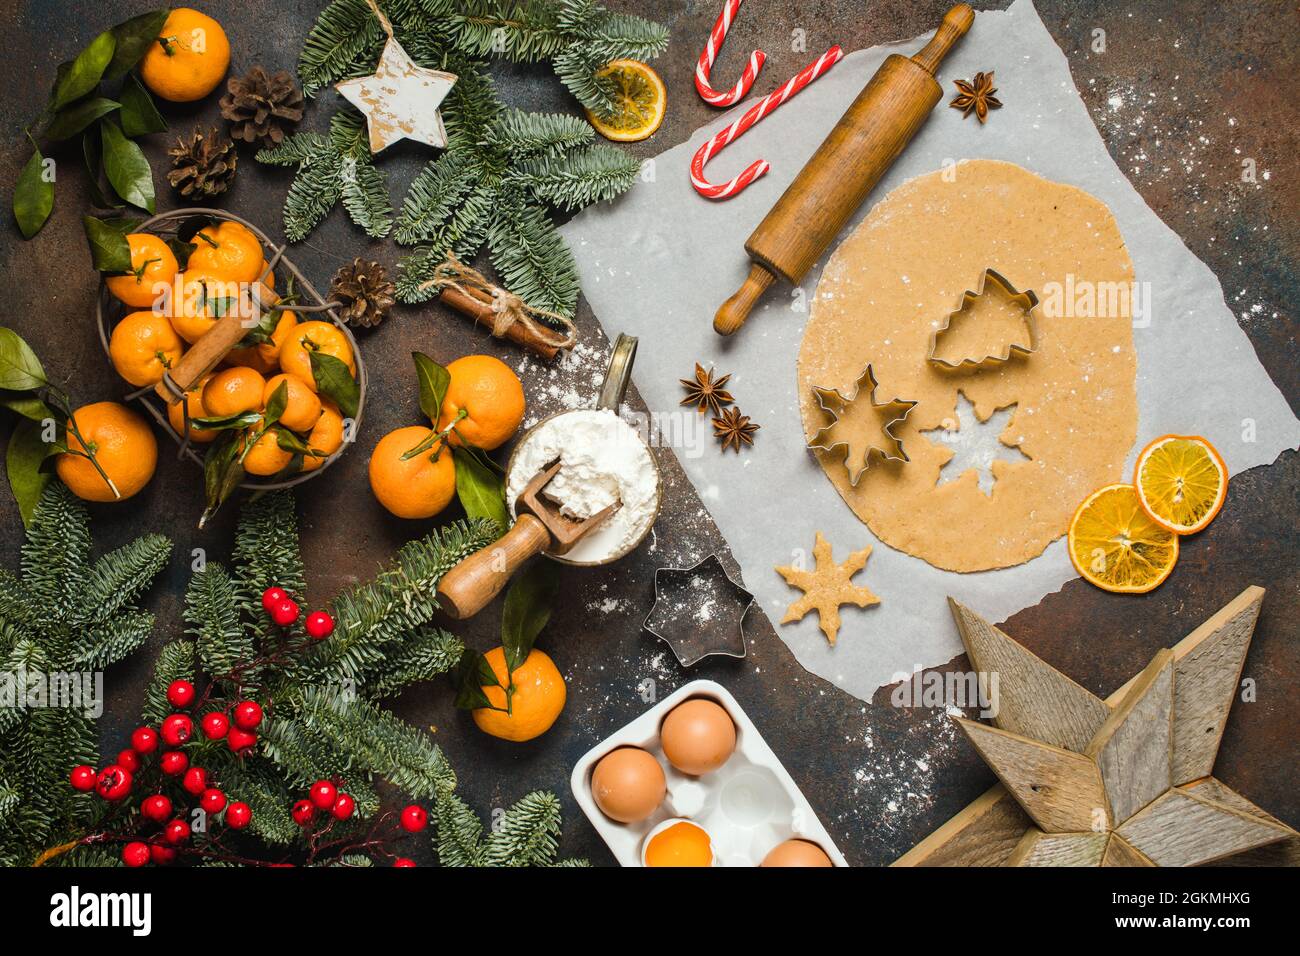 Holiday food. Ingredients for making Christmas ginger cookies small trees and snowflake. Mandarines, fir tree, candies. Stock Photo